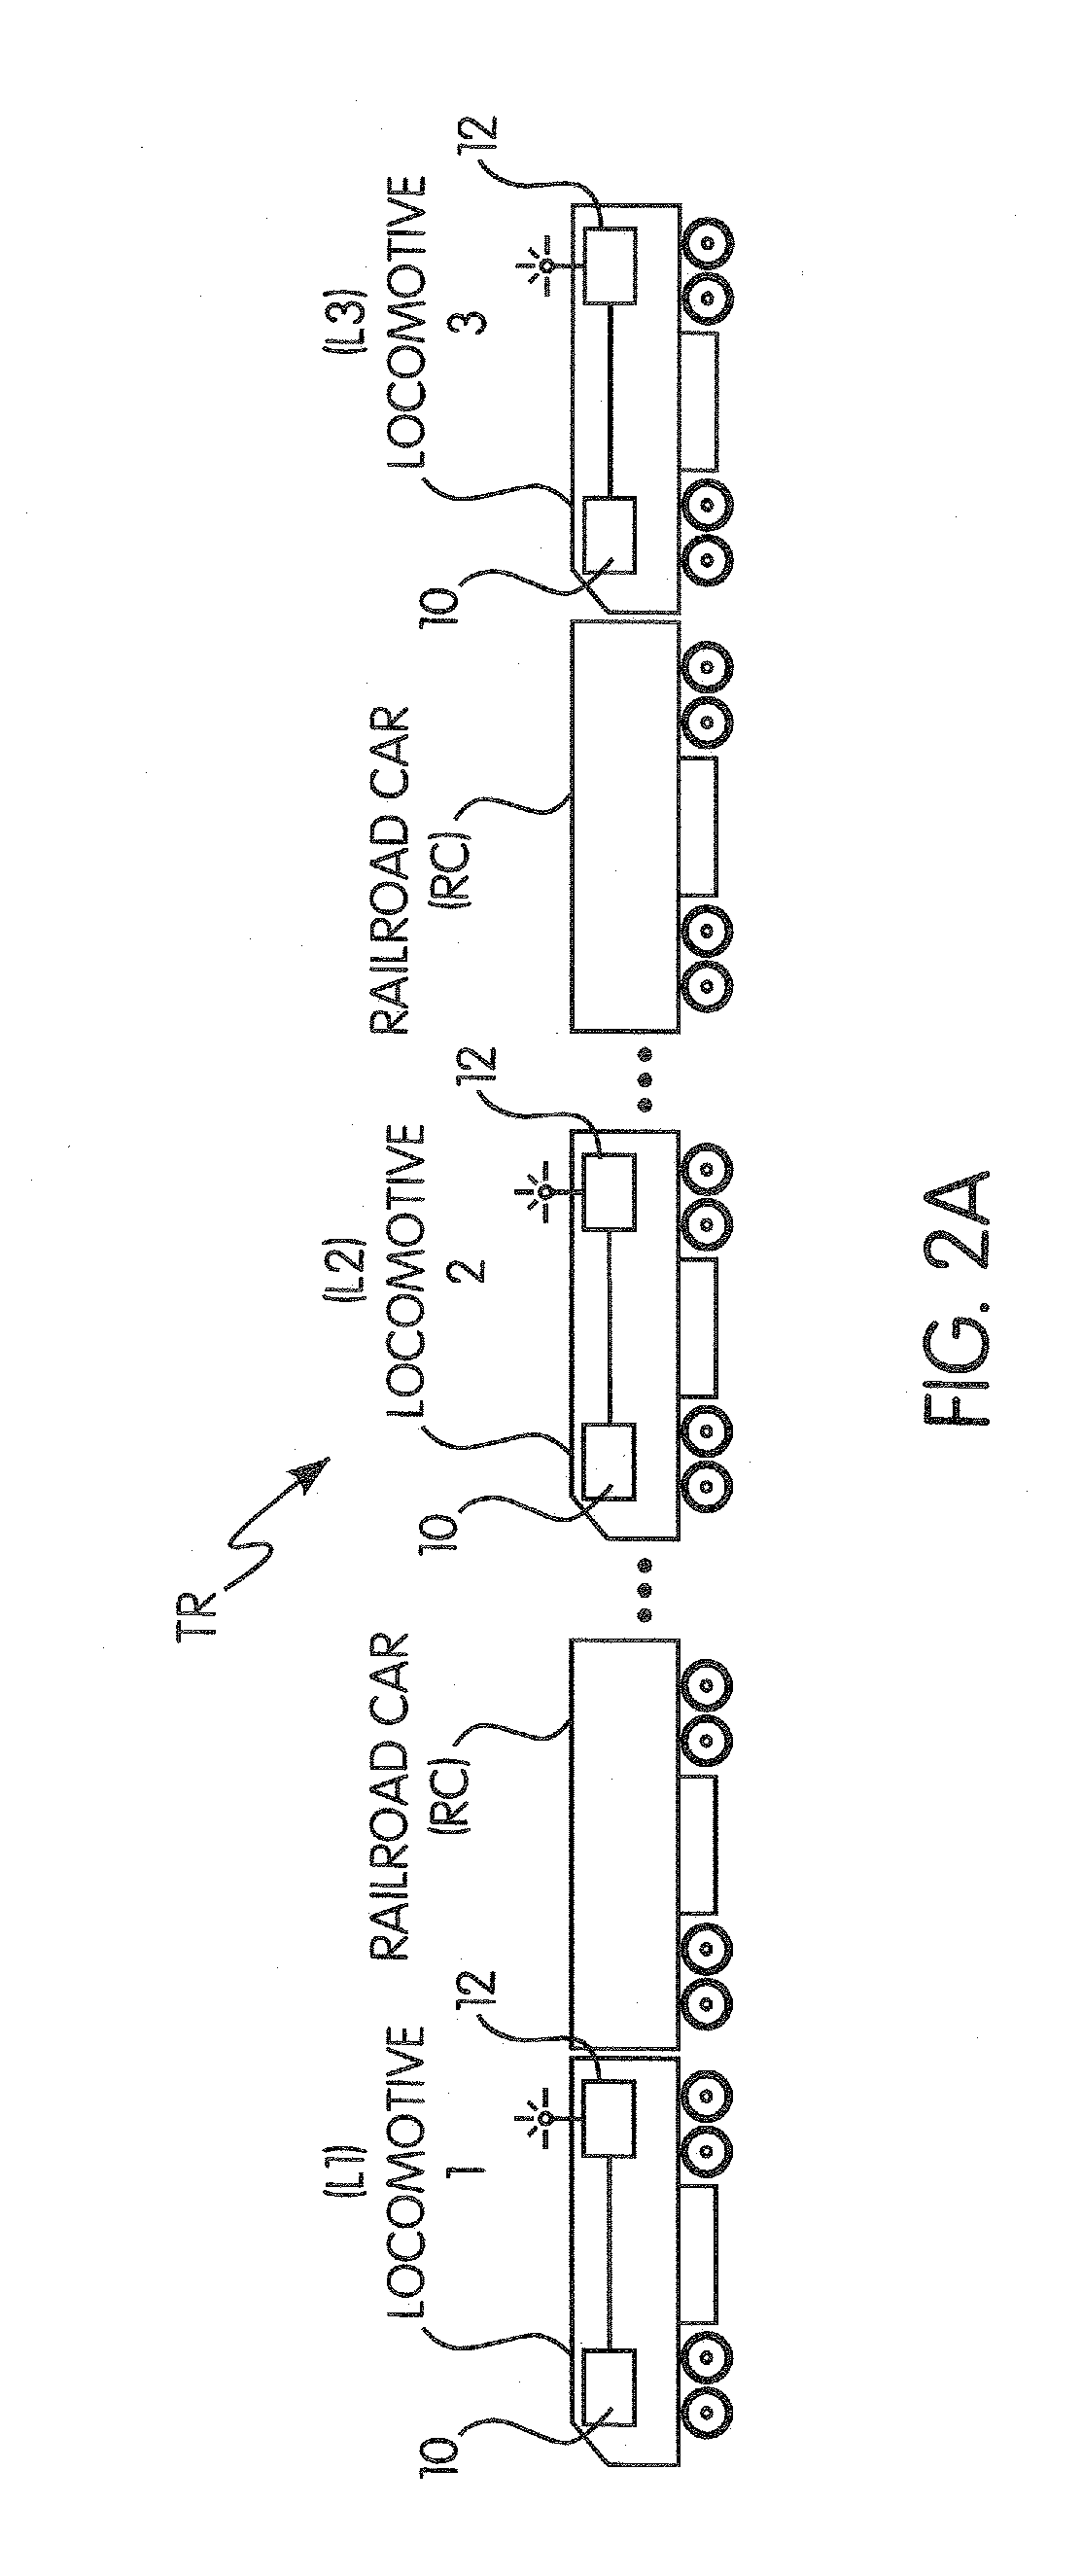 Systems and methods for determining track location and/or direction of travel